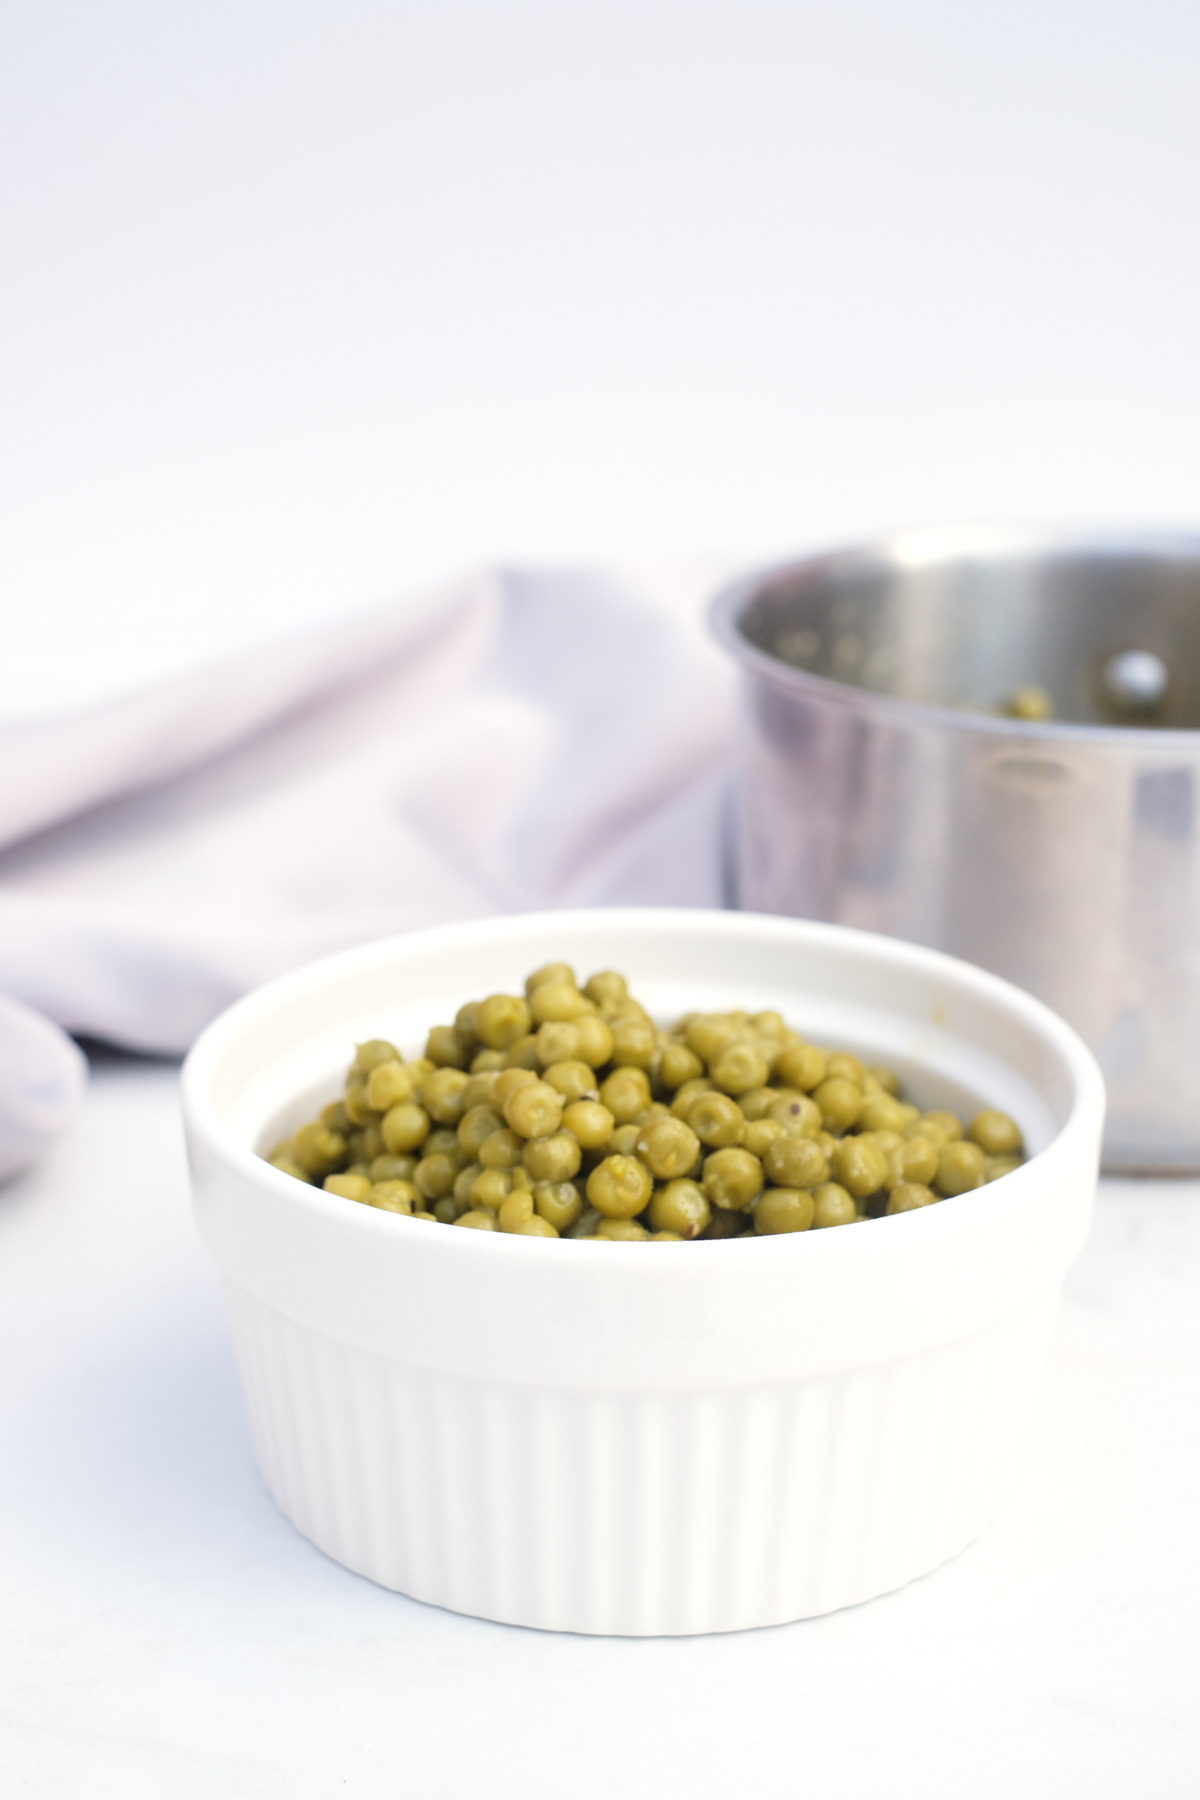 the completed how to cook canned peas recipe in a white serving dish